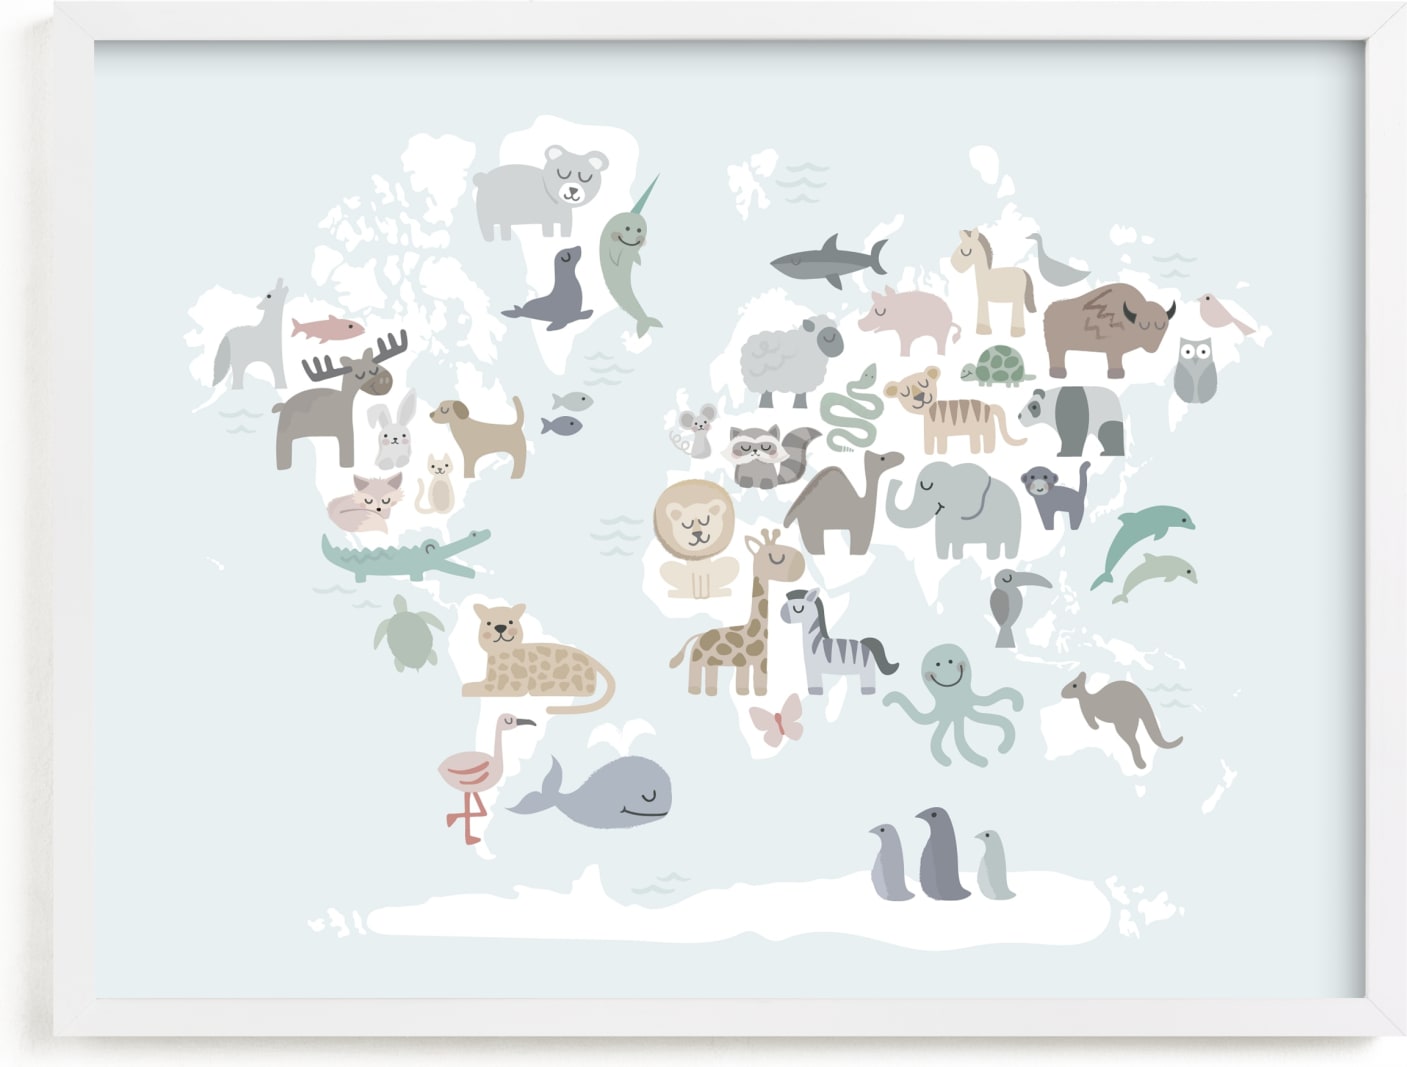 This is a blue art by Jessie Steury called Wild World Map.